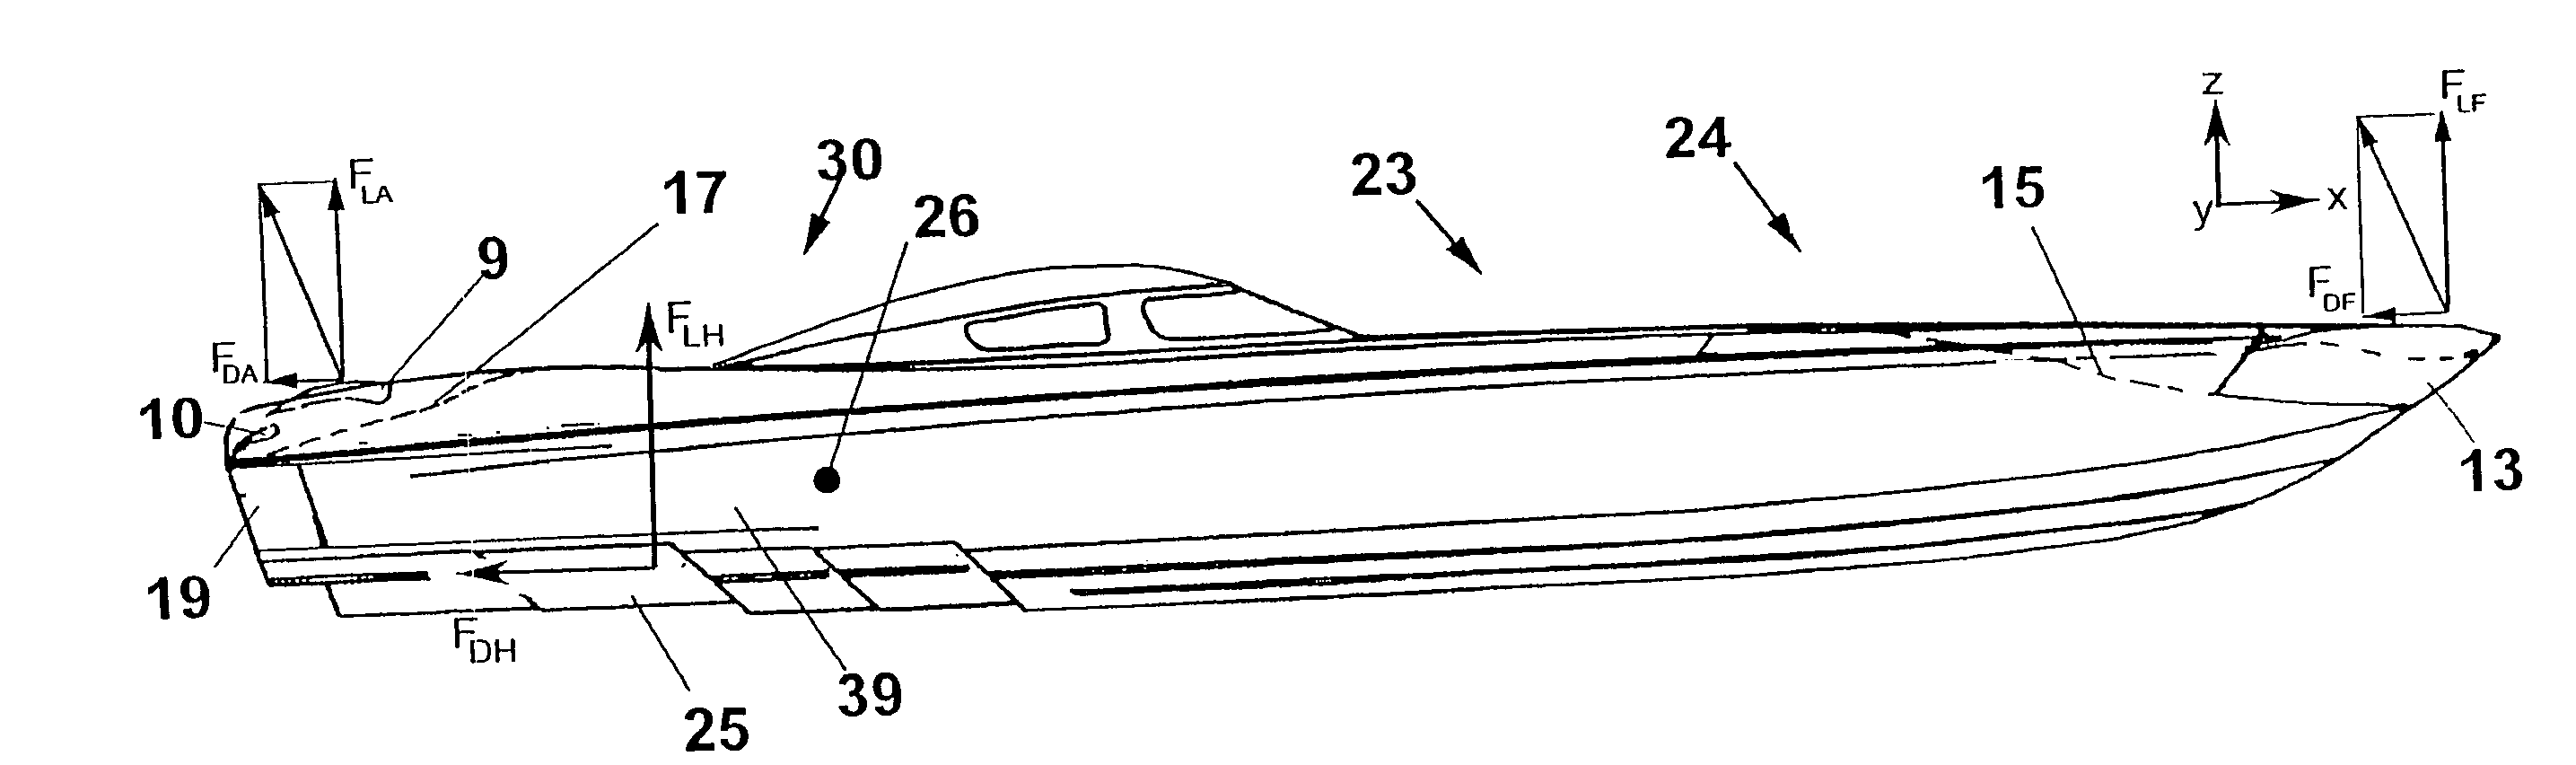 Methods and apparatus for aerodynamic and hydrodynamic drag reduction and attitude control for high speed boats